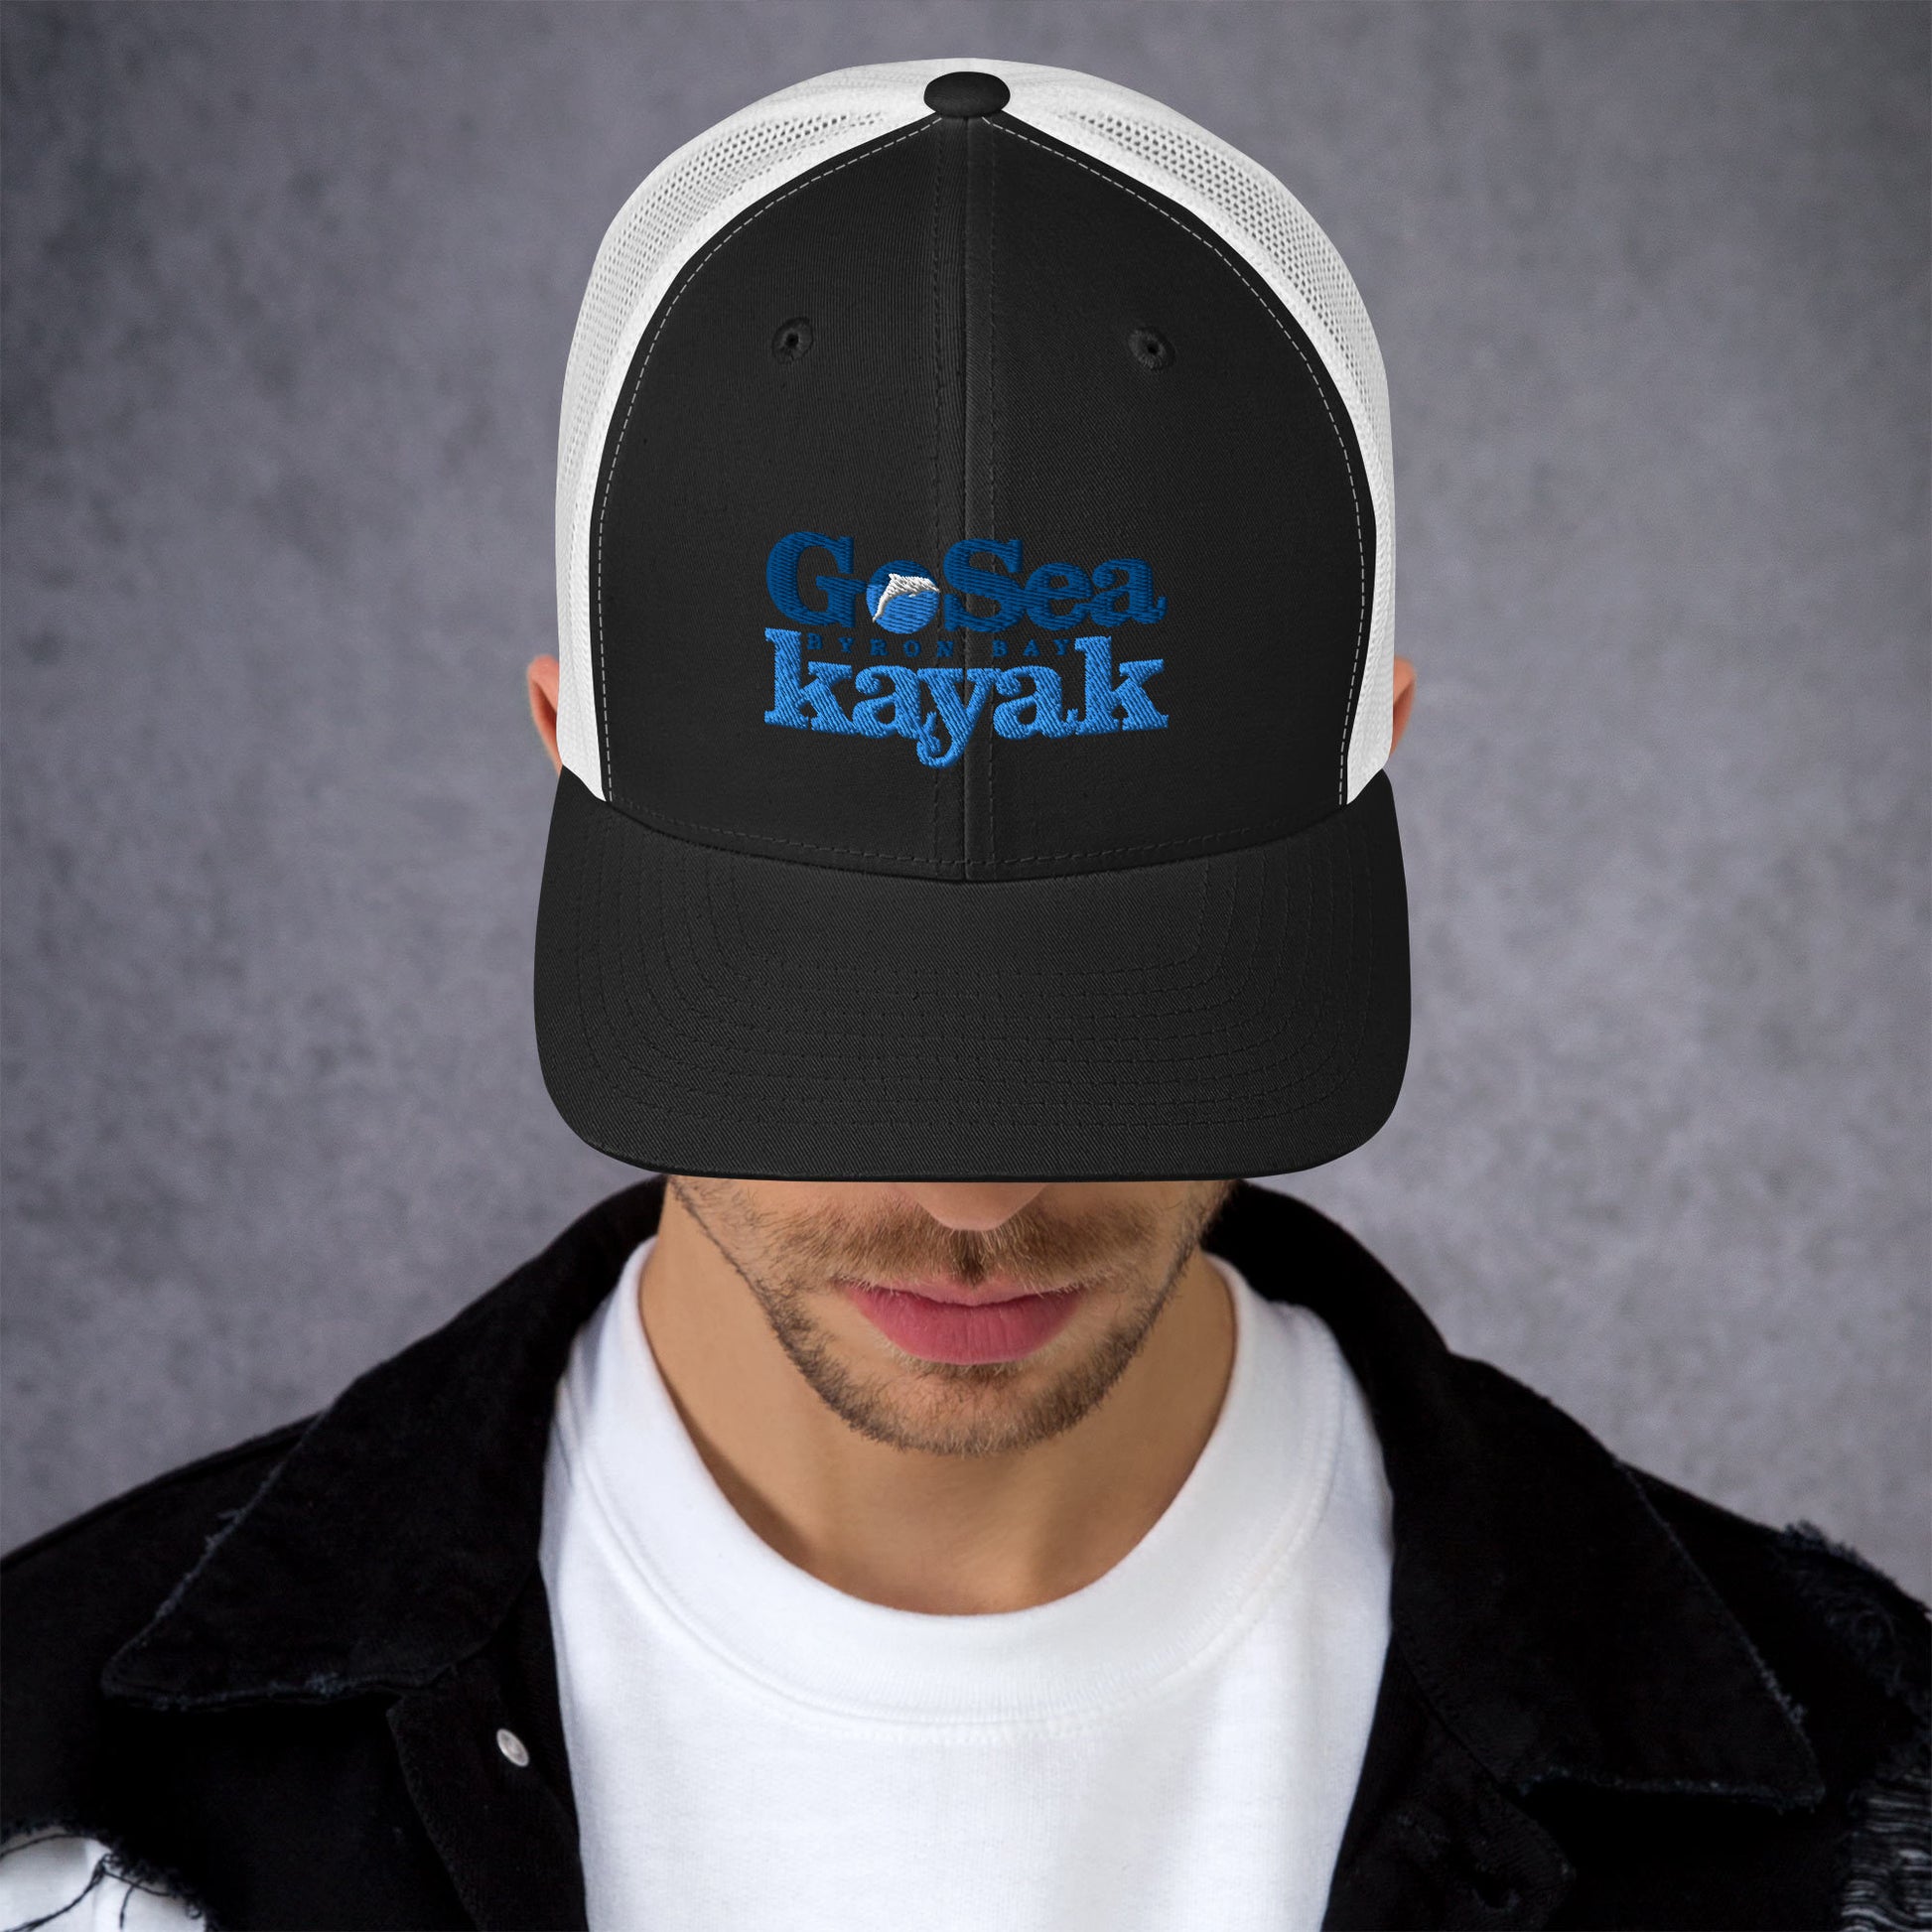  Trucker Cap - Black/White - Front view - being warn by man with his head down - Go Sea Kayak Byron Bay logo on front - Genuine Byron Bay Merchandise | Produced by Go Sea Kayak Byron Bay 